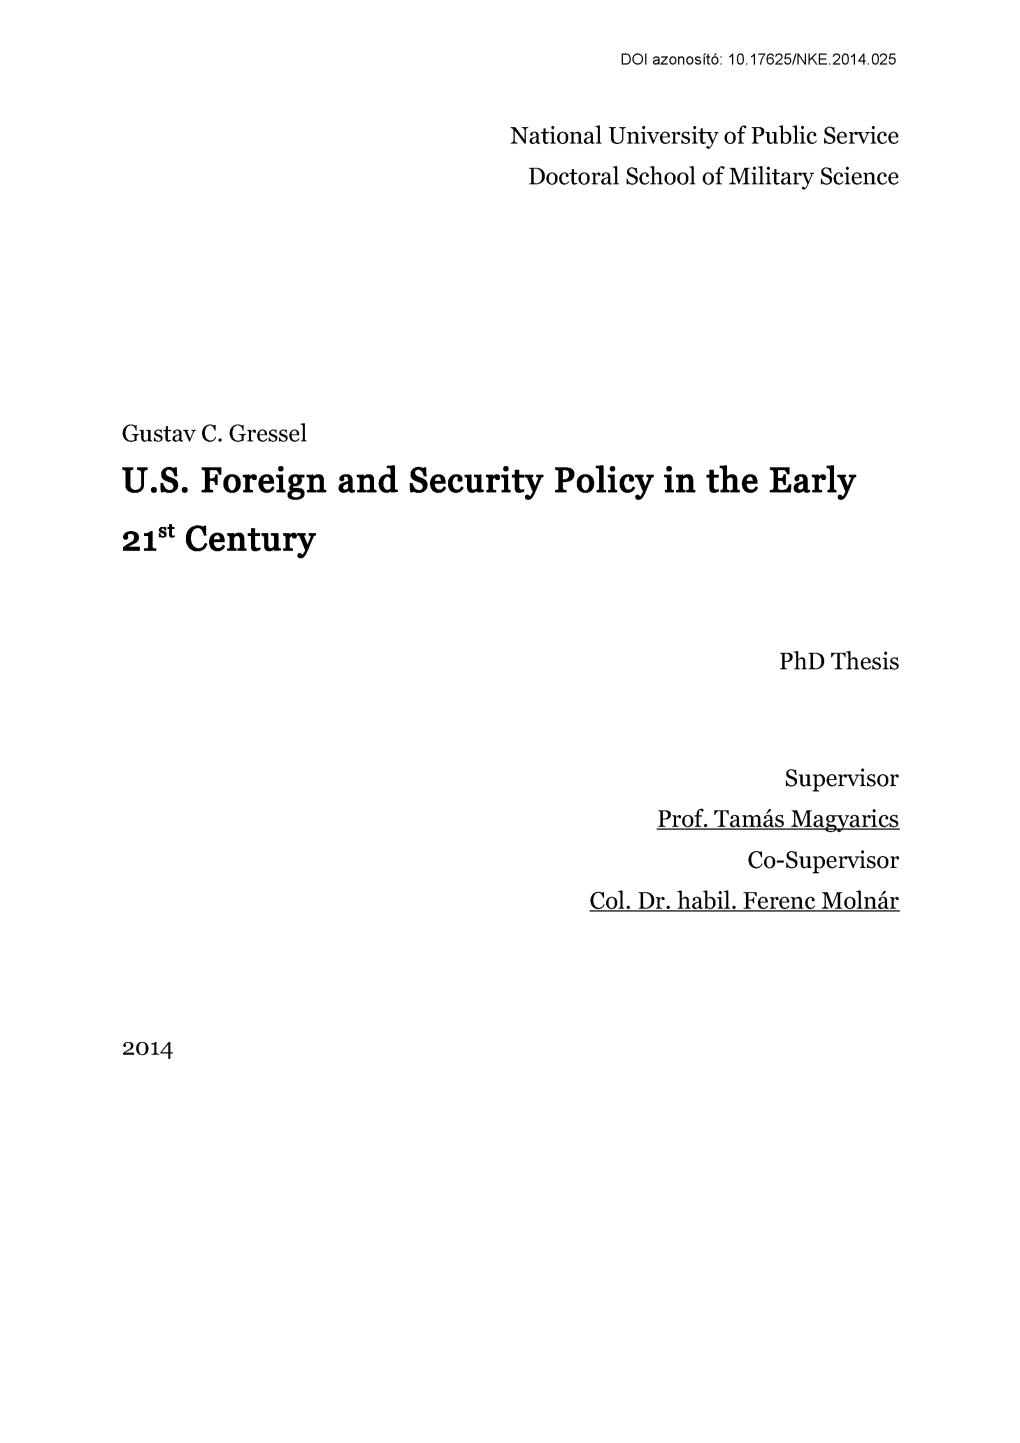 U.S. Foreign and Security Policy in the Early 21St Century